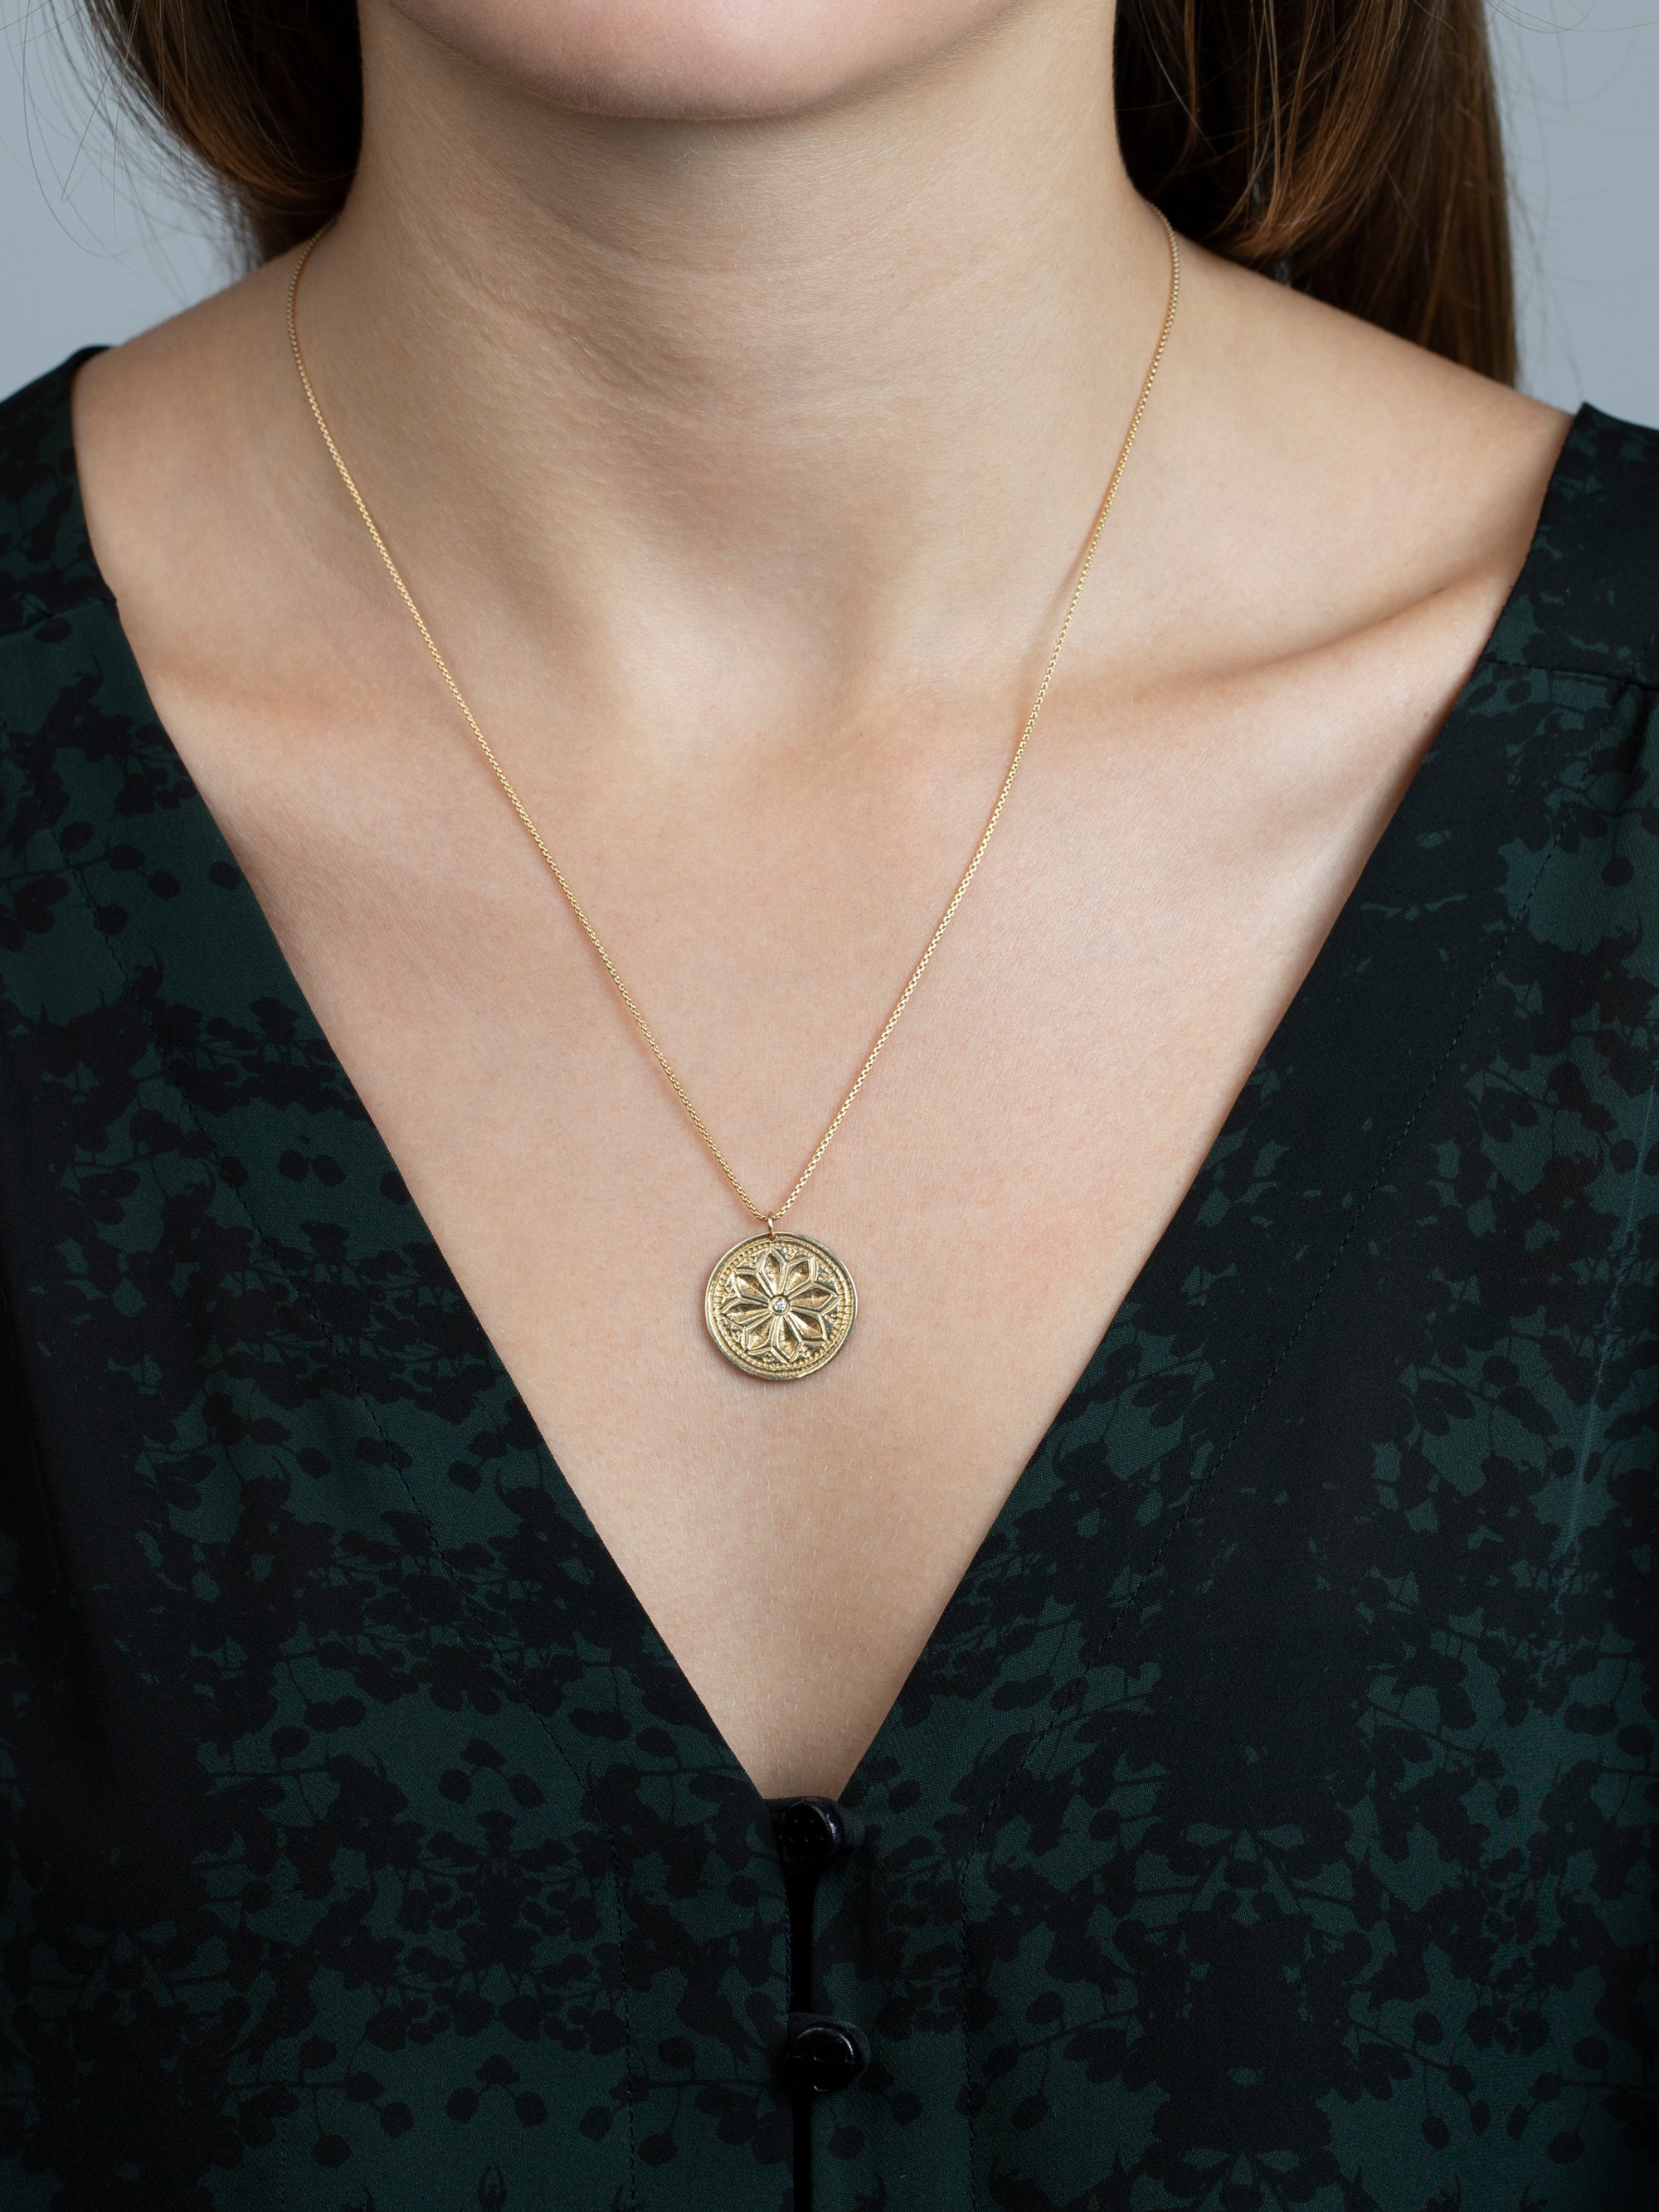 Lotus Necklace - large "bloom in unlikely places"